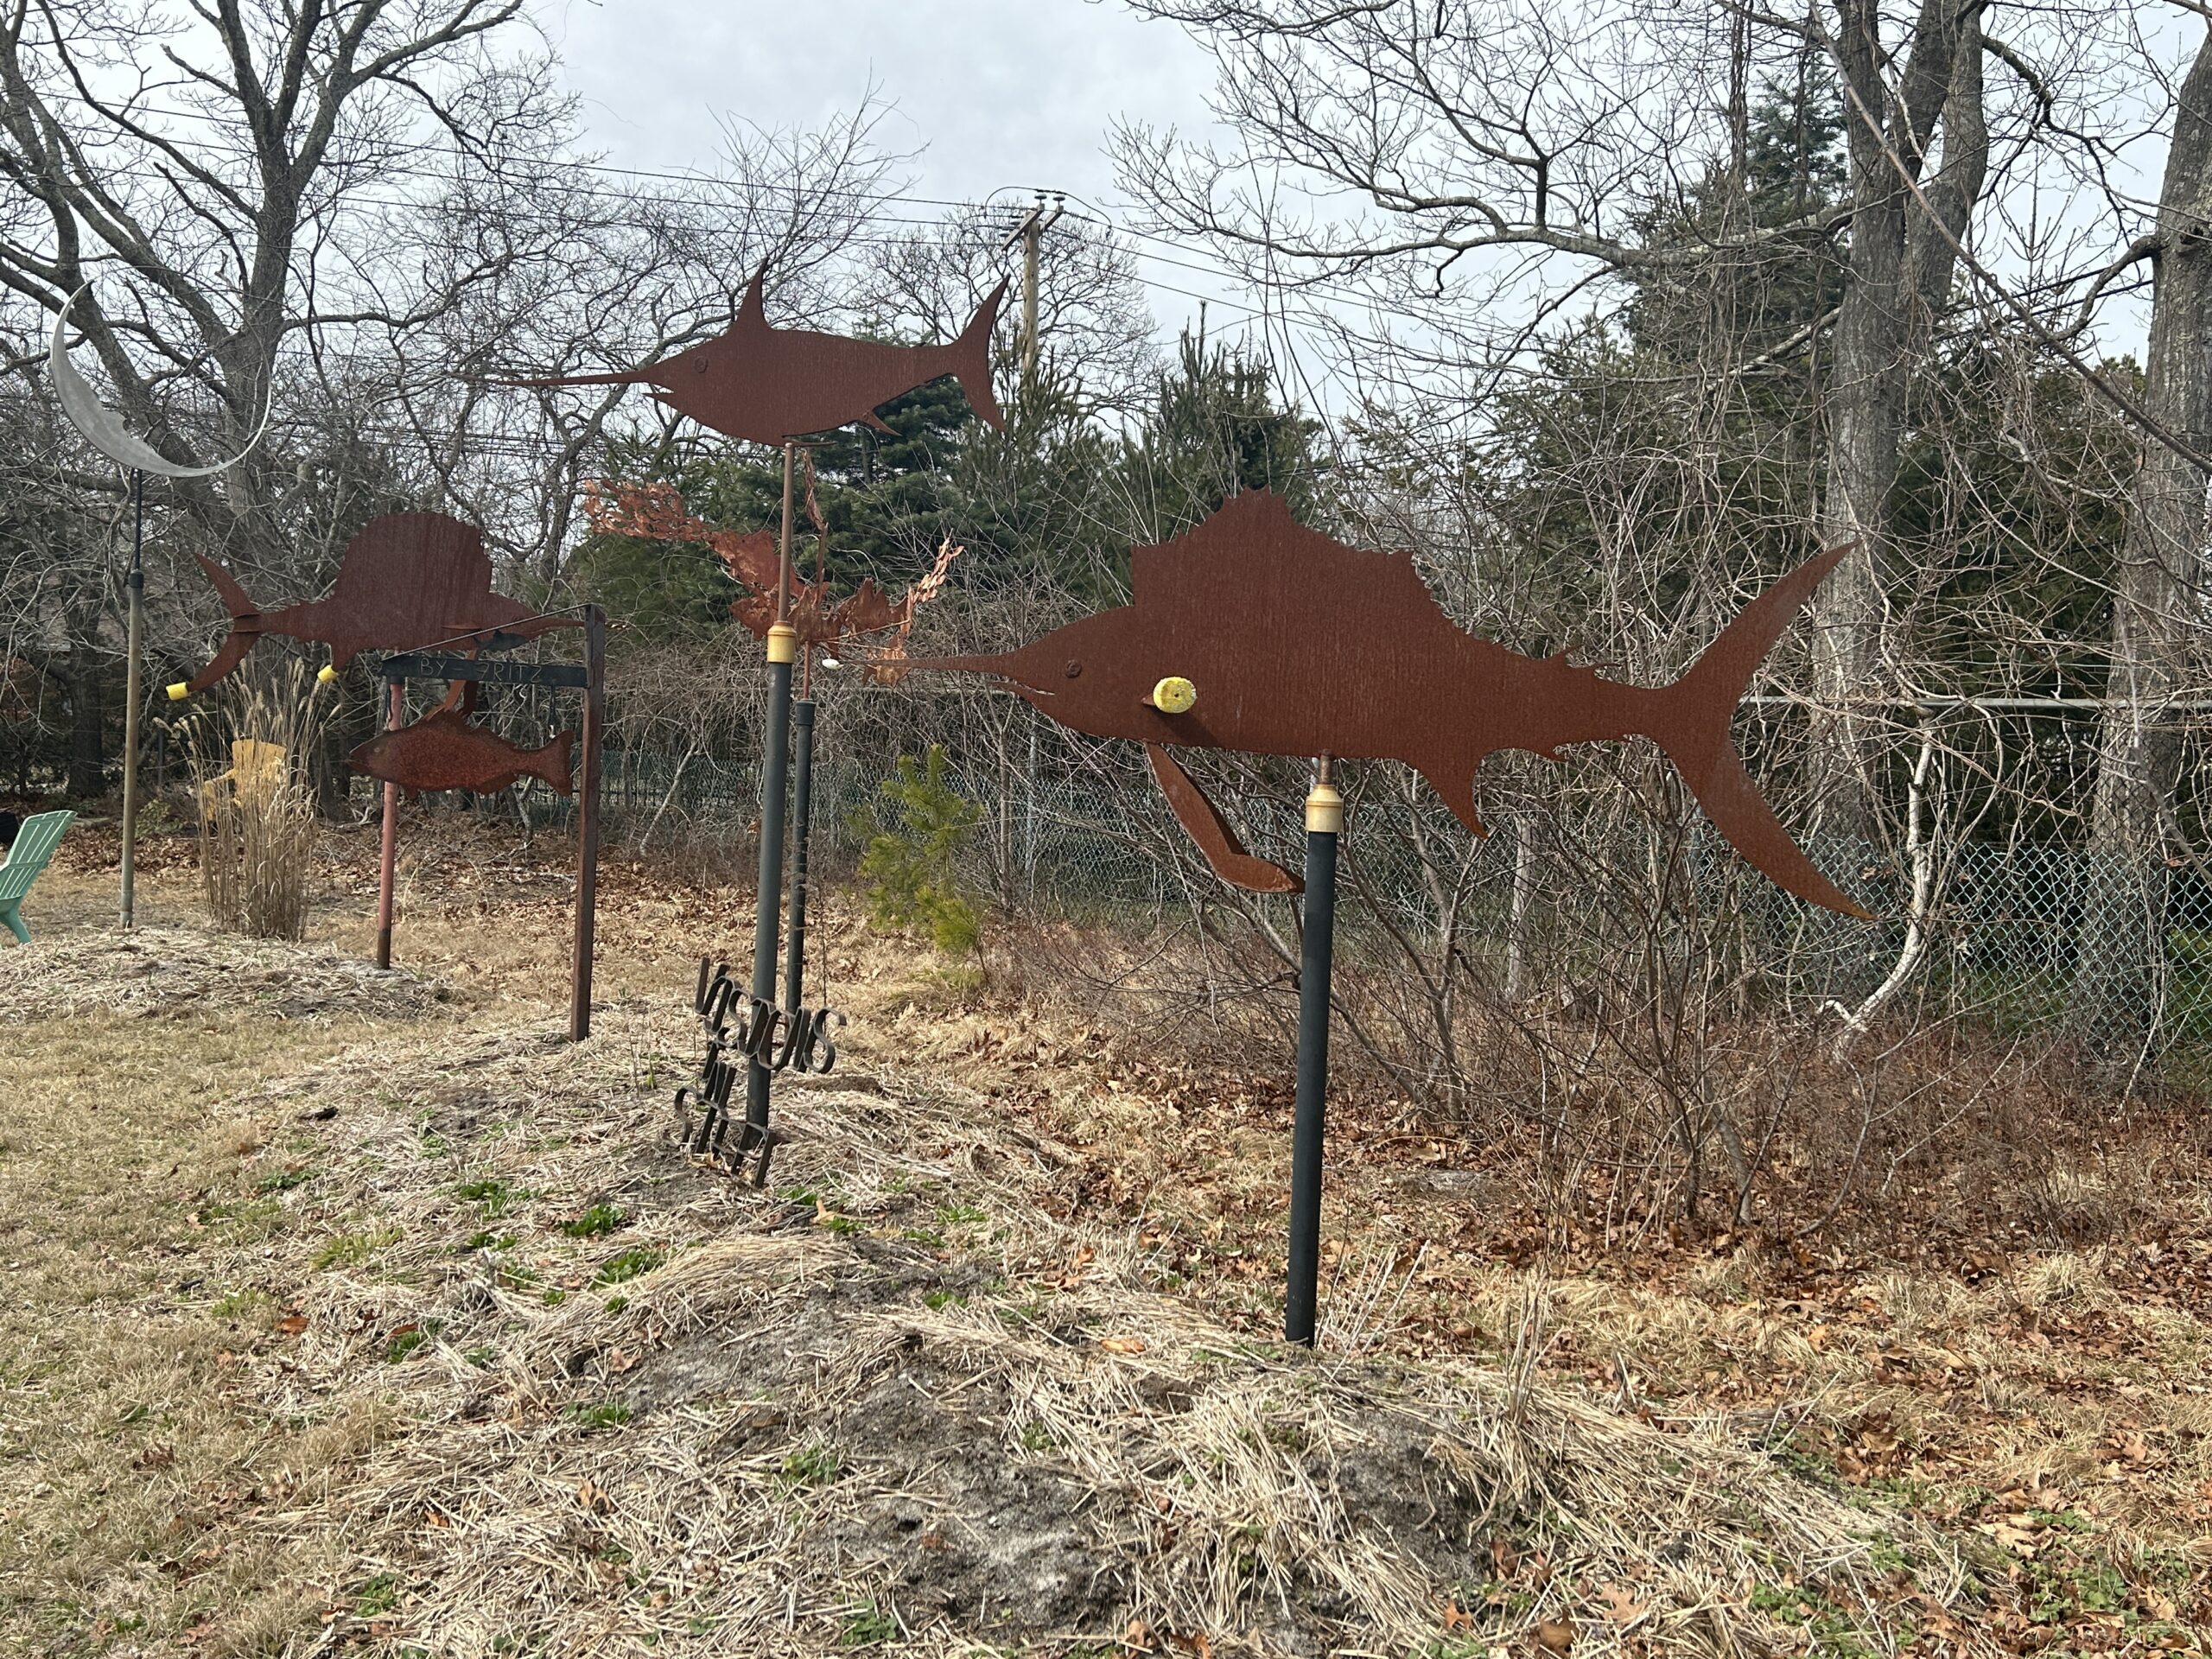 Visions in Steel sculptures by Fritz Cass are found at the Ecological Cultural Initiative site in Hampton Bays.   KITTY MERRILL